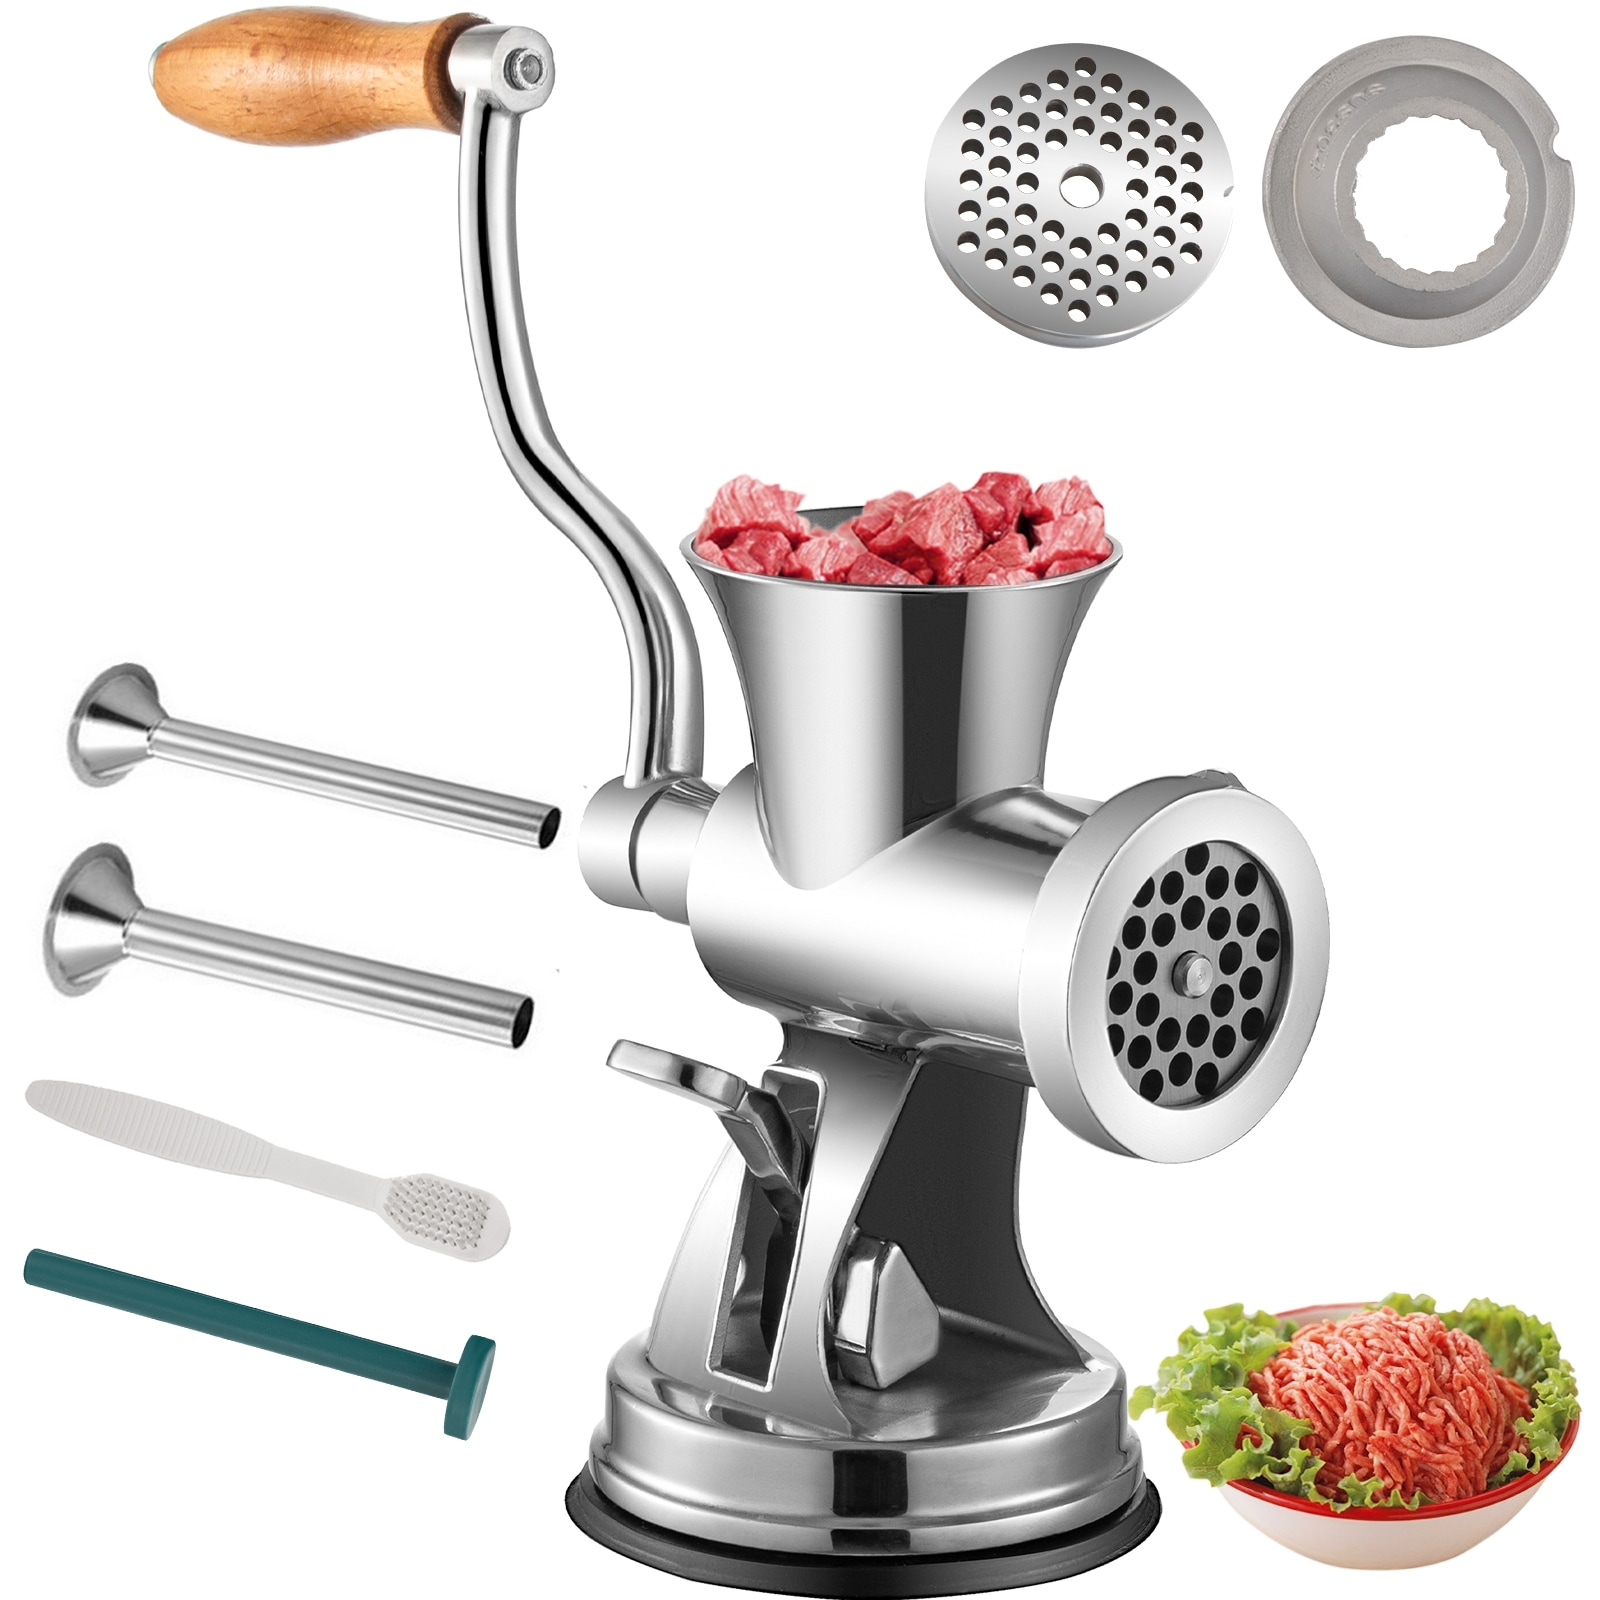 VEVOR Heavy Duty Manual Meat Grinder Hand Operated Mincer Food Stainless Steel